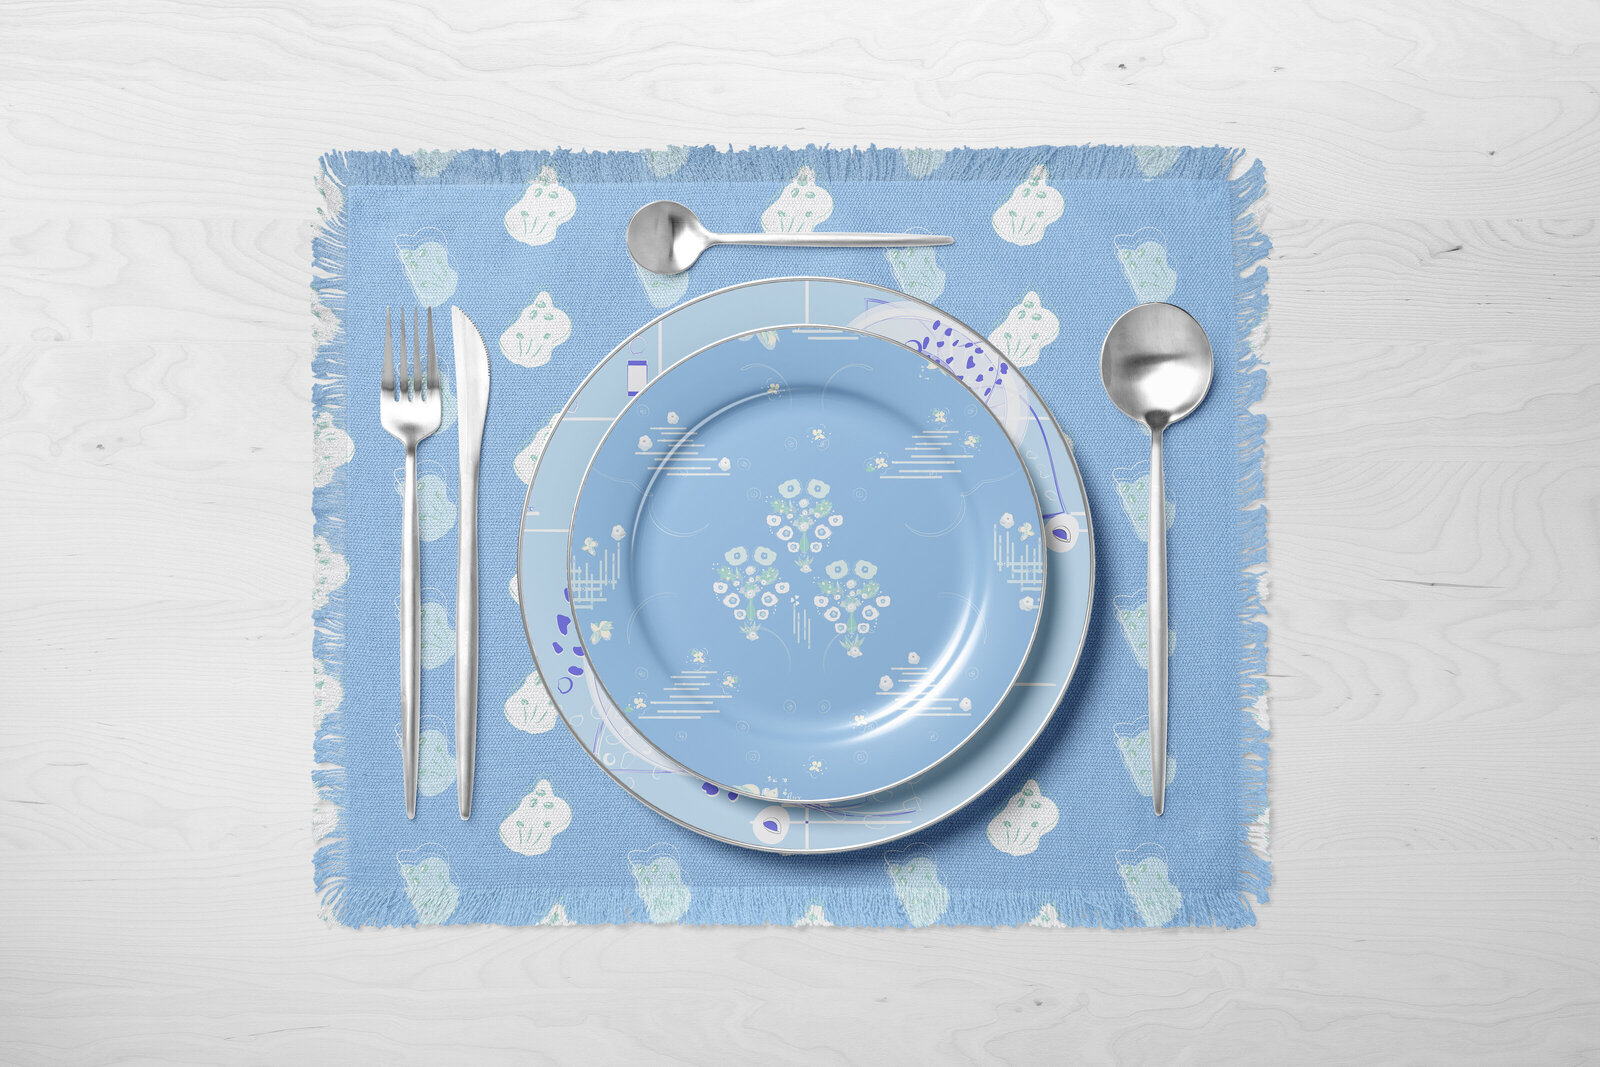 Charisse-Marei-pattern-design-on-placement-and-dinner-plates